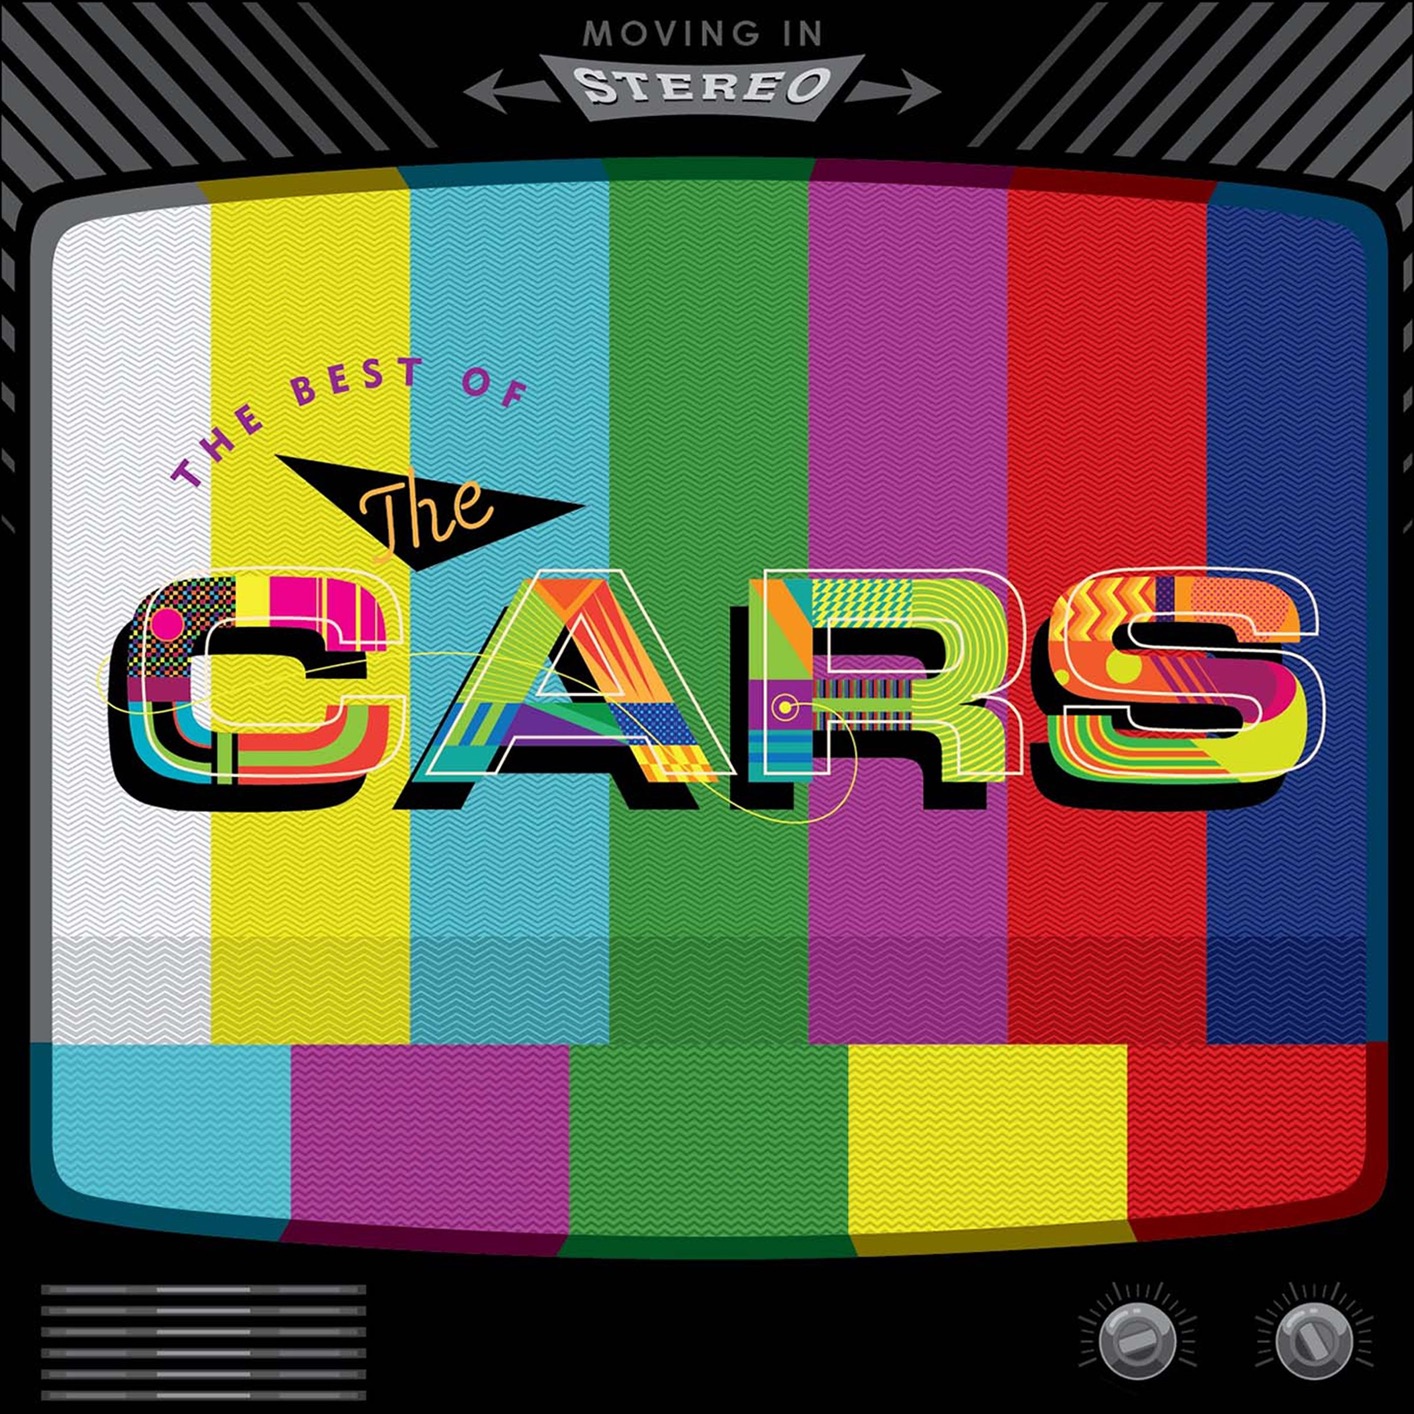 The Cars - Moving In Stereo: The Best Of The Cars (2016) [FLAC 24bit/192kHz]